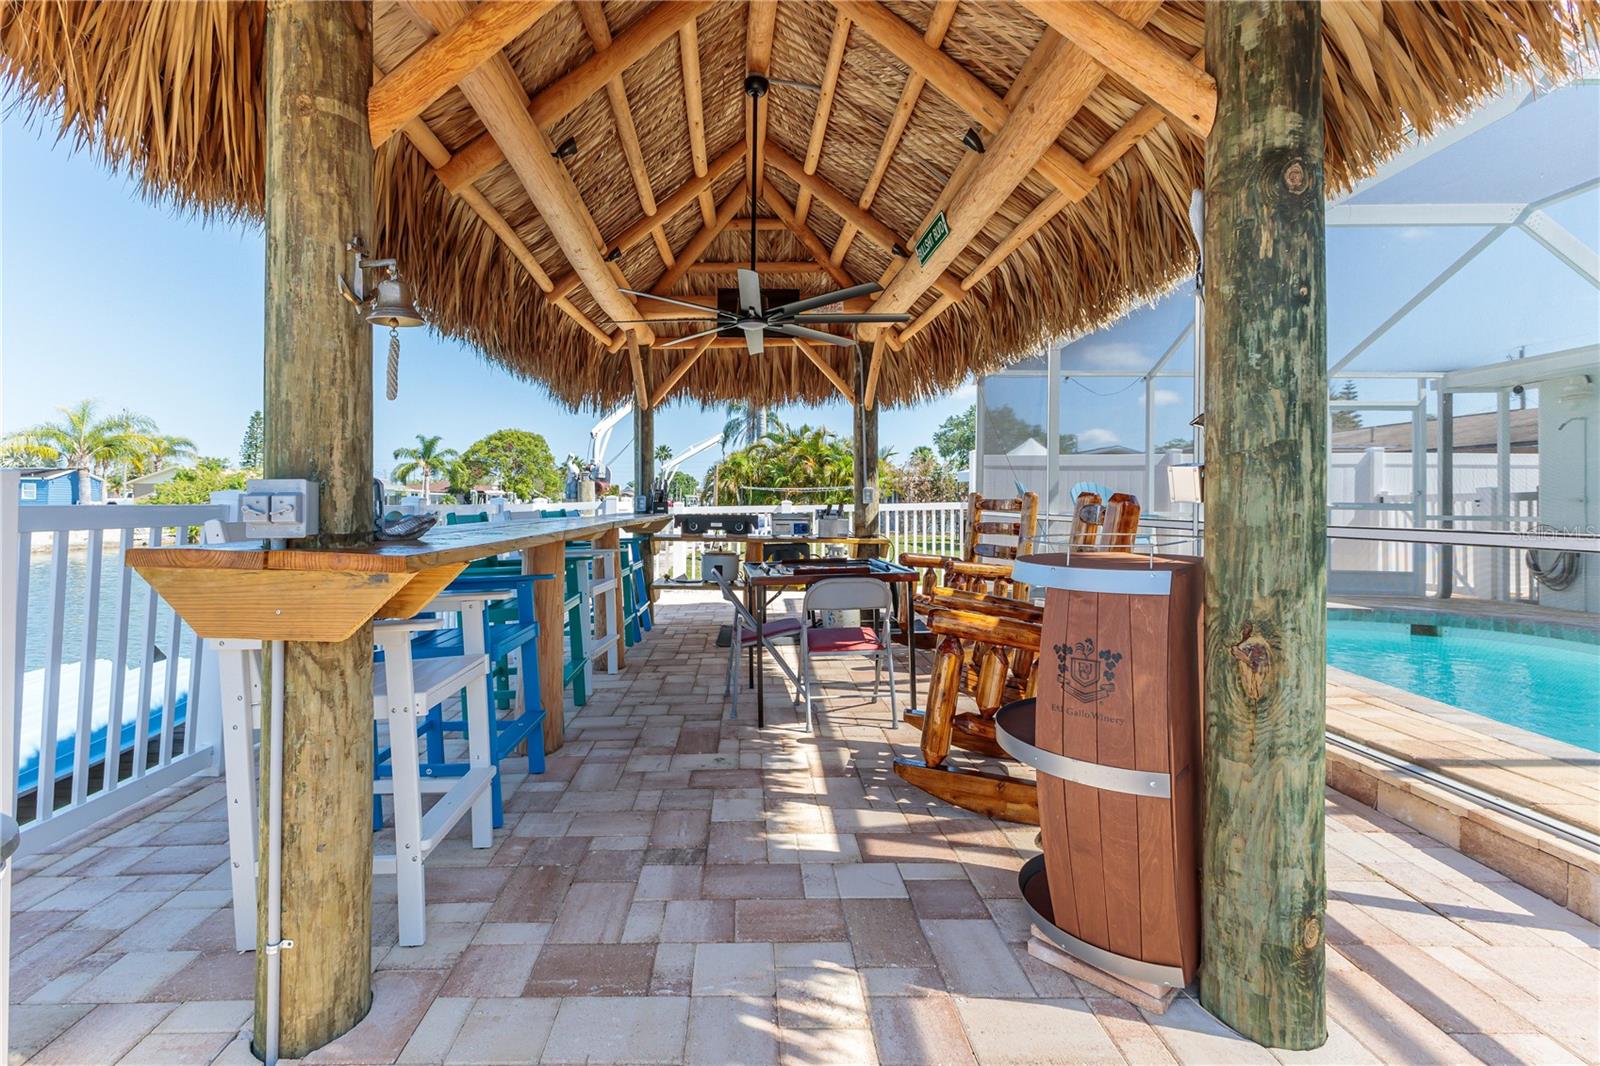 Custom made Tiki bar that has so much space for all!